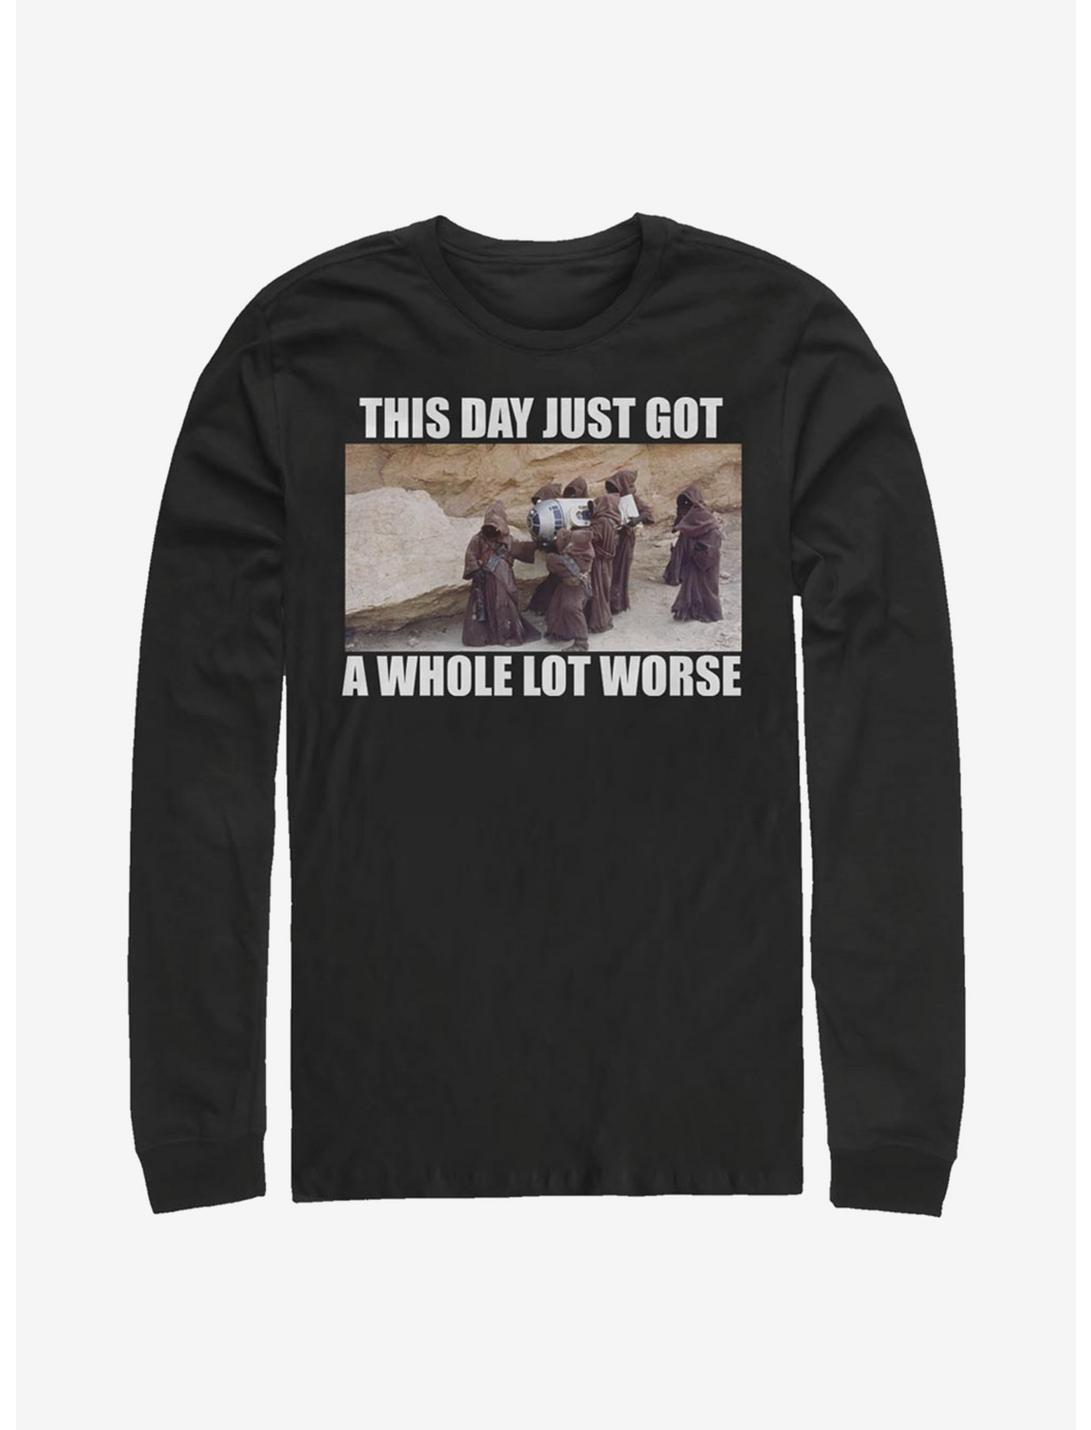 Star Wars This Day Just Got Worse Long-Sleeve T-Shirt, BLACK, hi-res